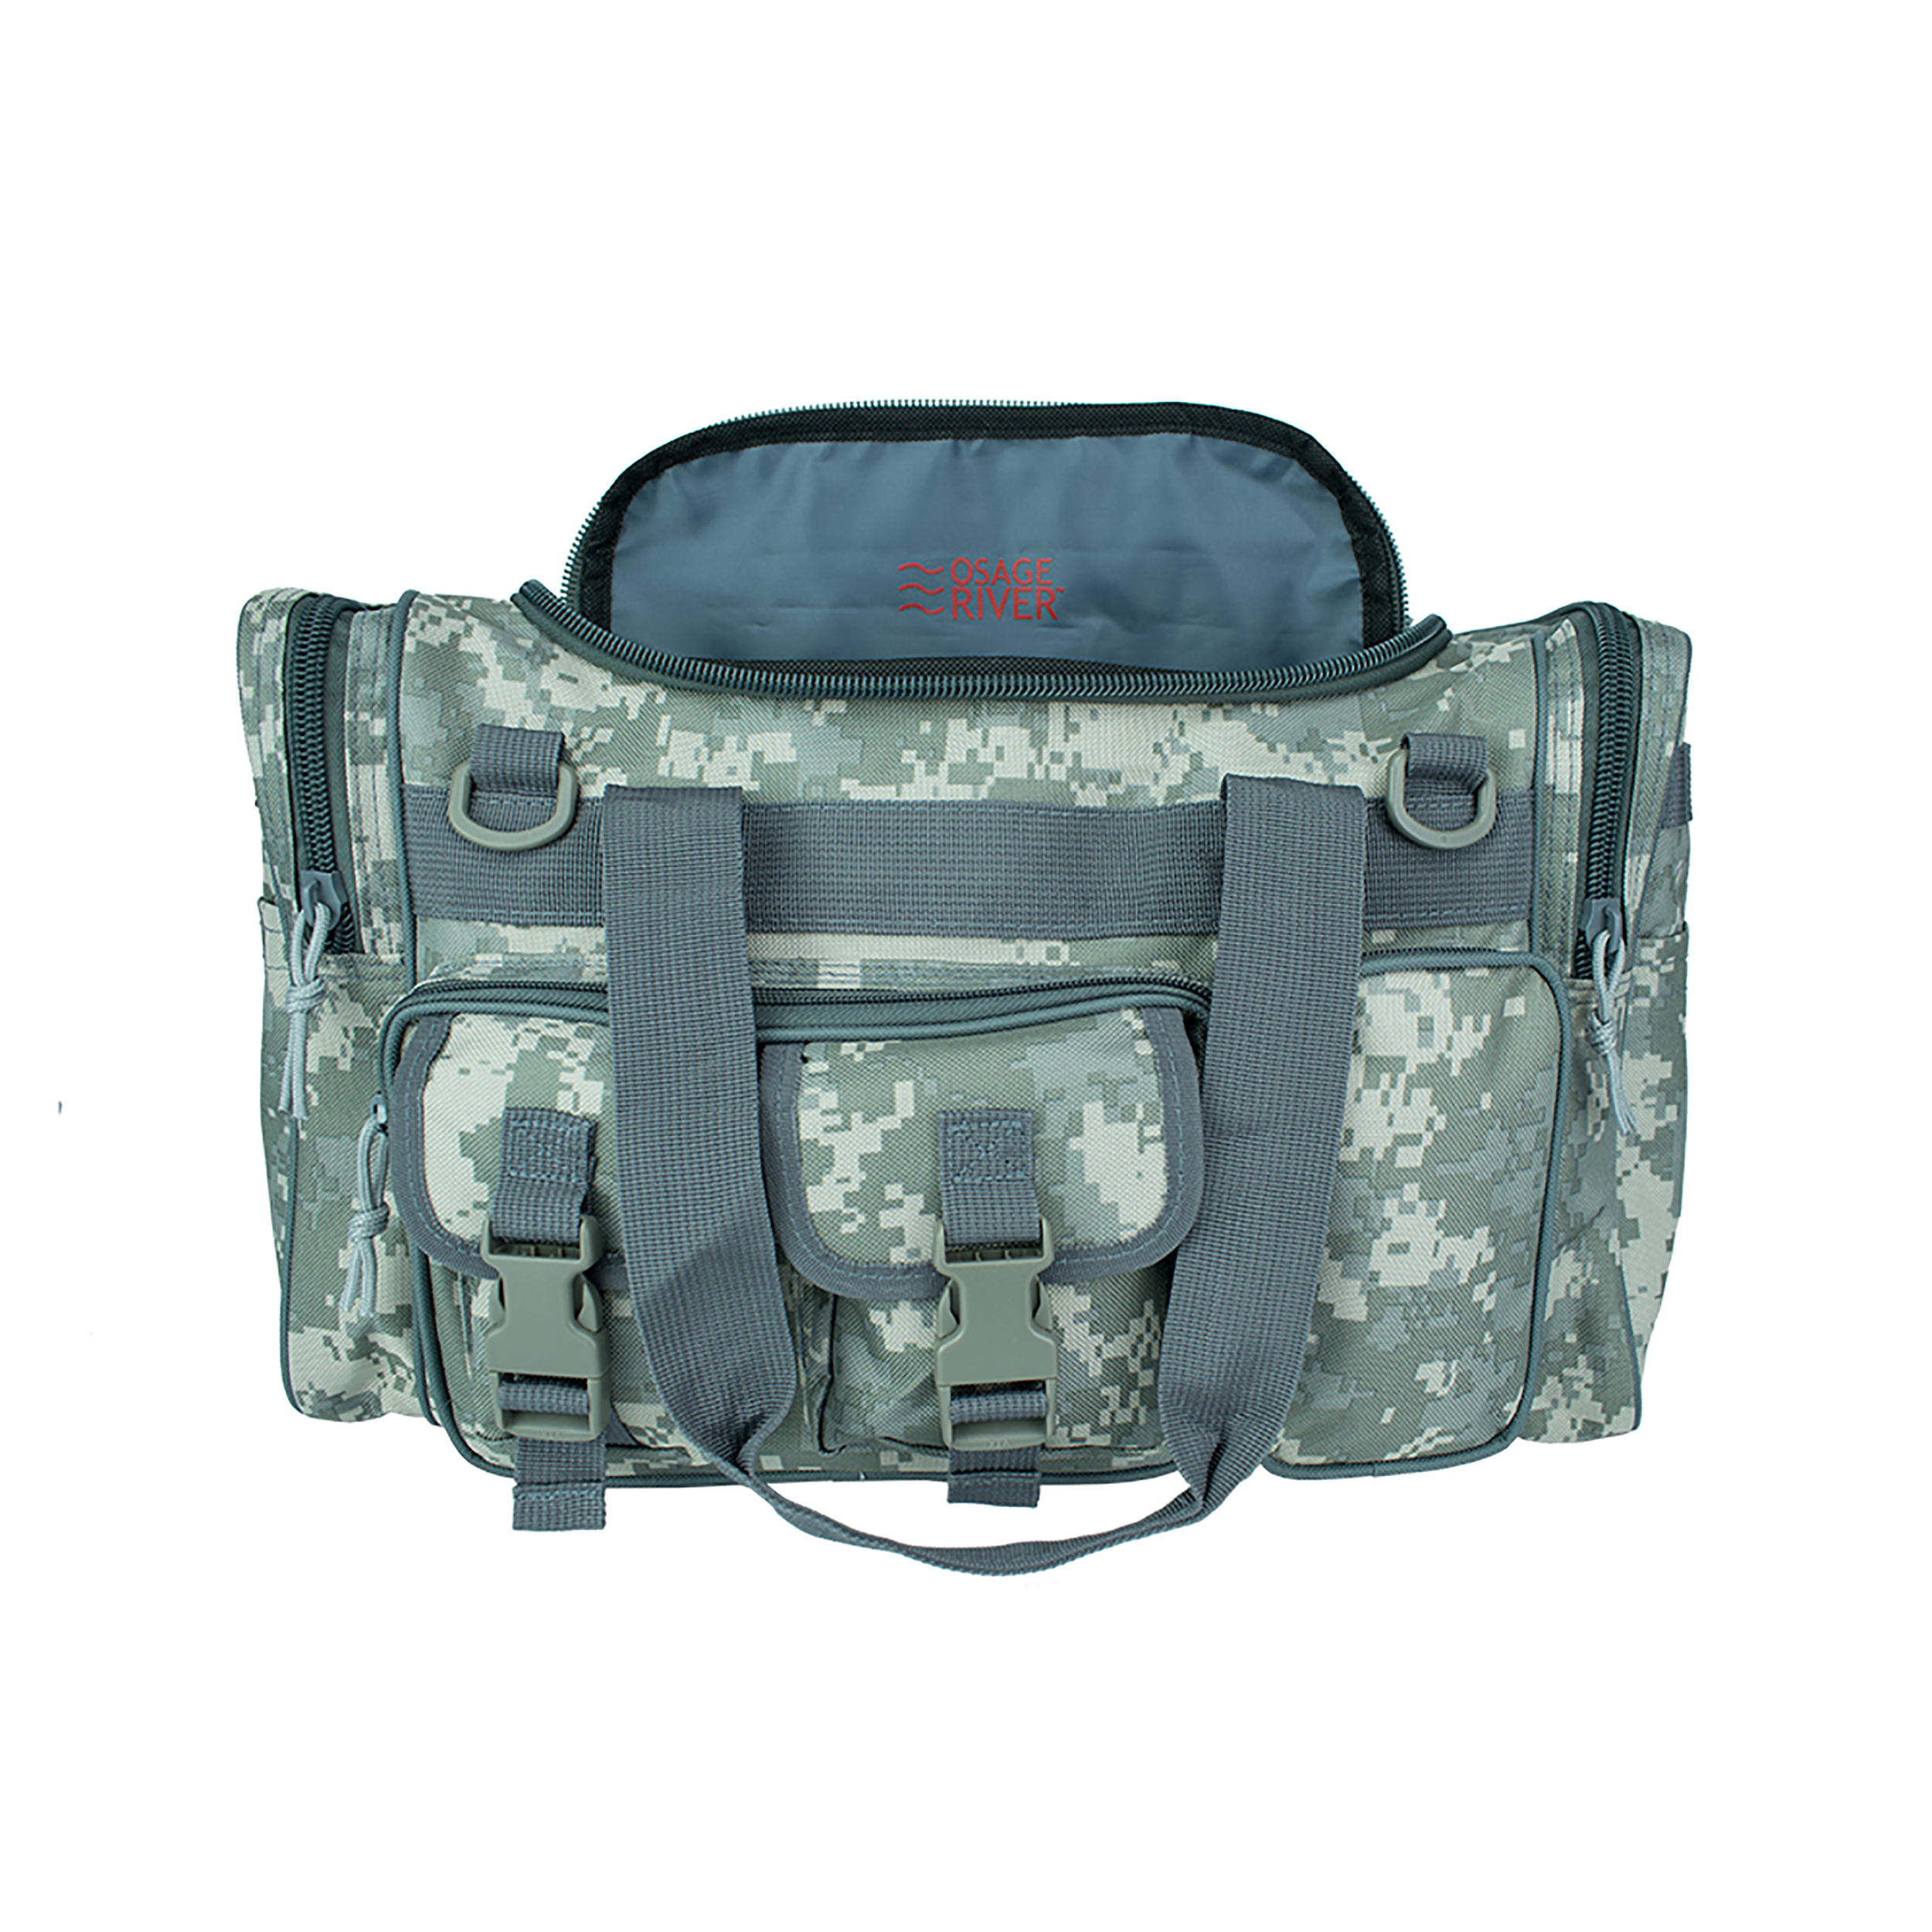 Osage River Tactical Duffle Bag with Shoulder Strap and Carry Handles | eBay